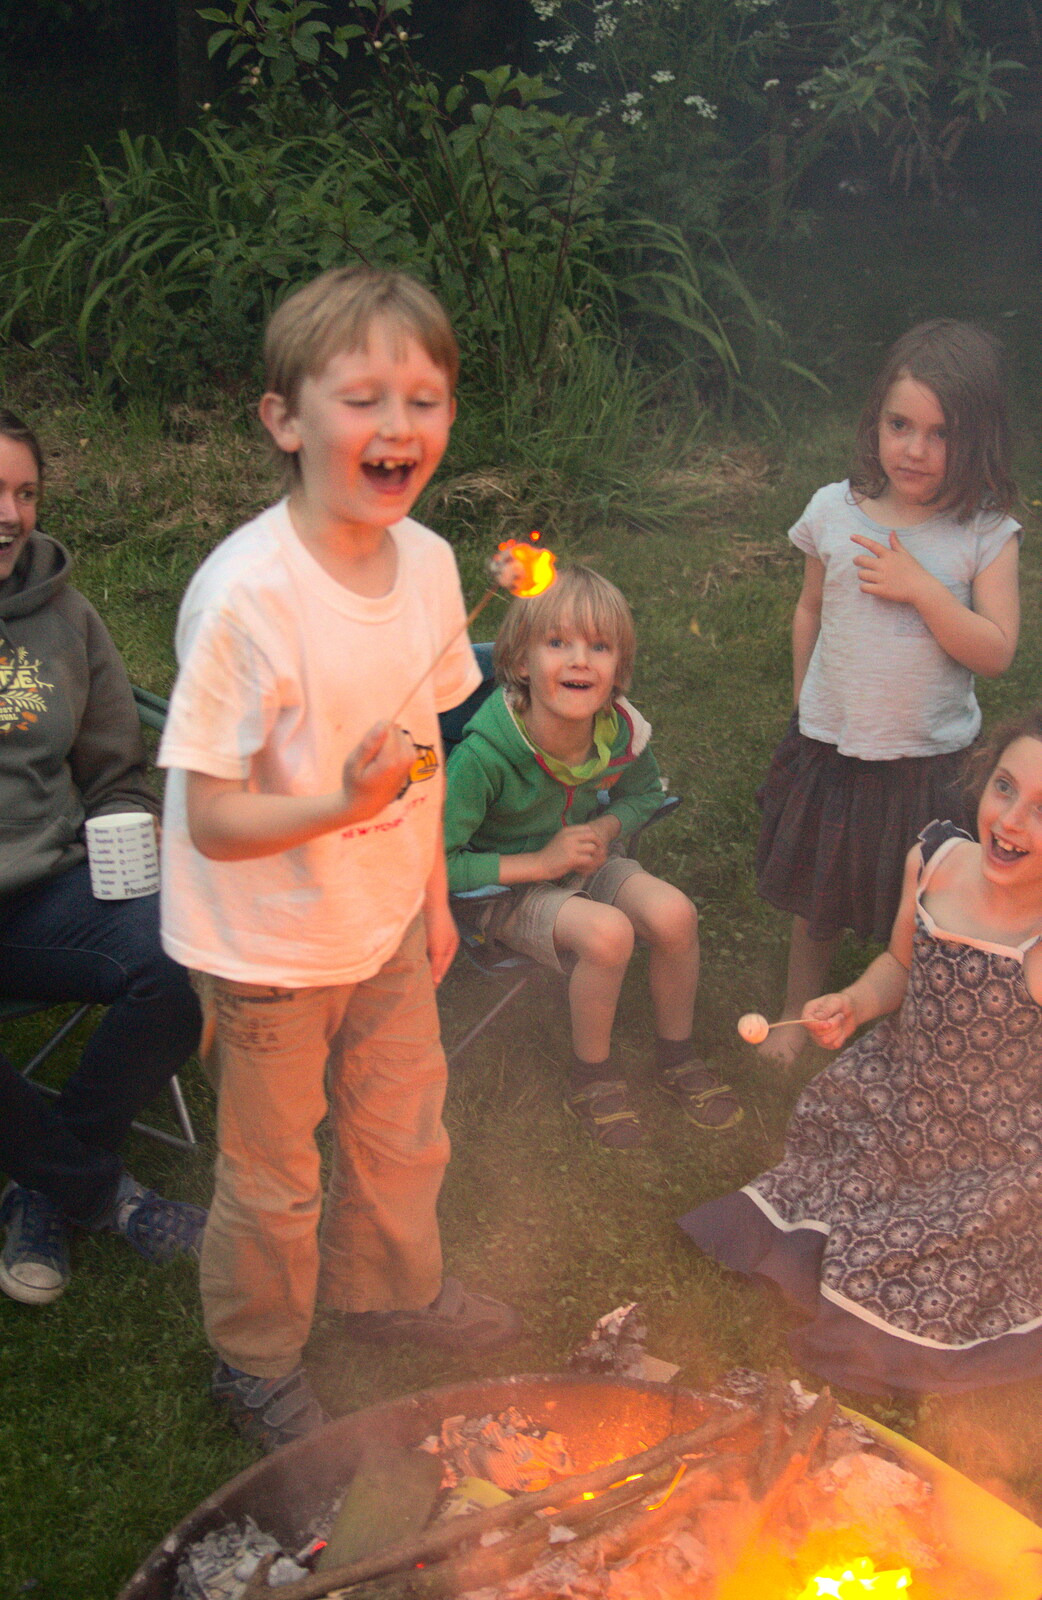 There's excitement as Oak torches his marshmallow  from Wavy and Martina's Combined Birthdays, Thrandeston, Suffolk - 27th May 2017